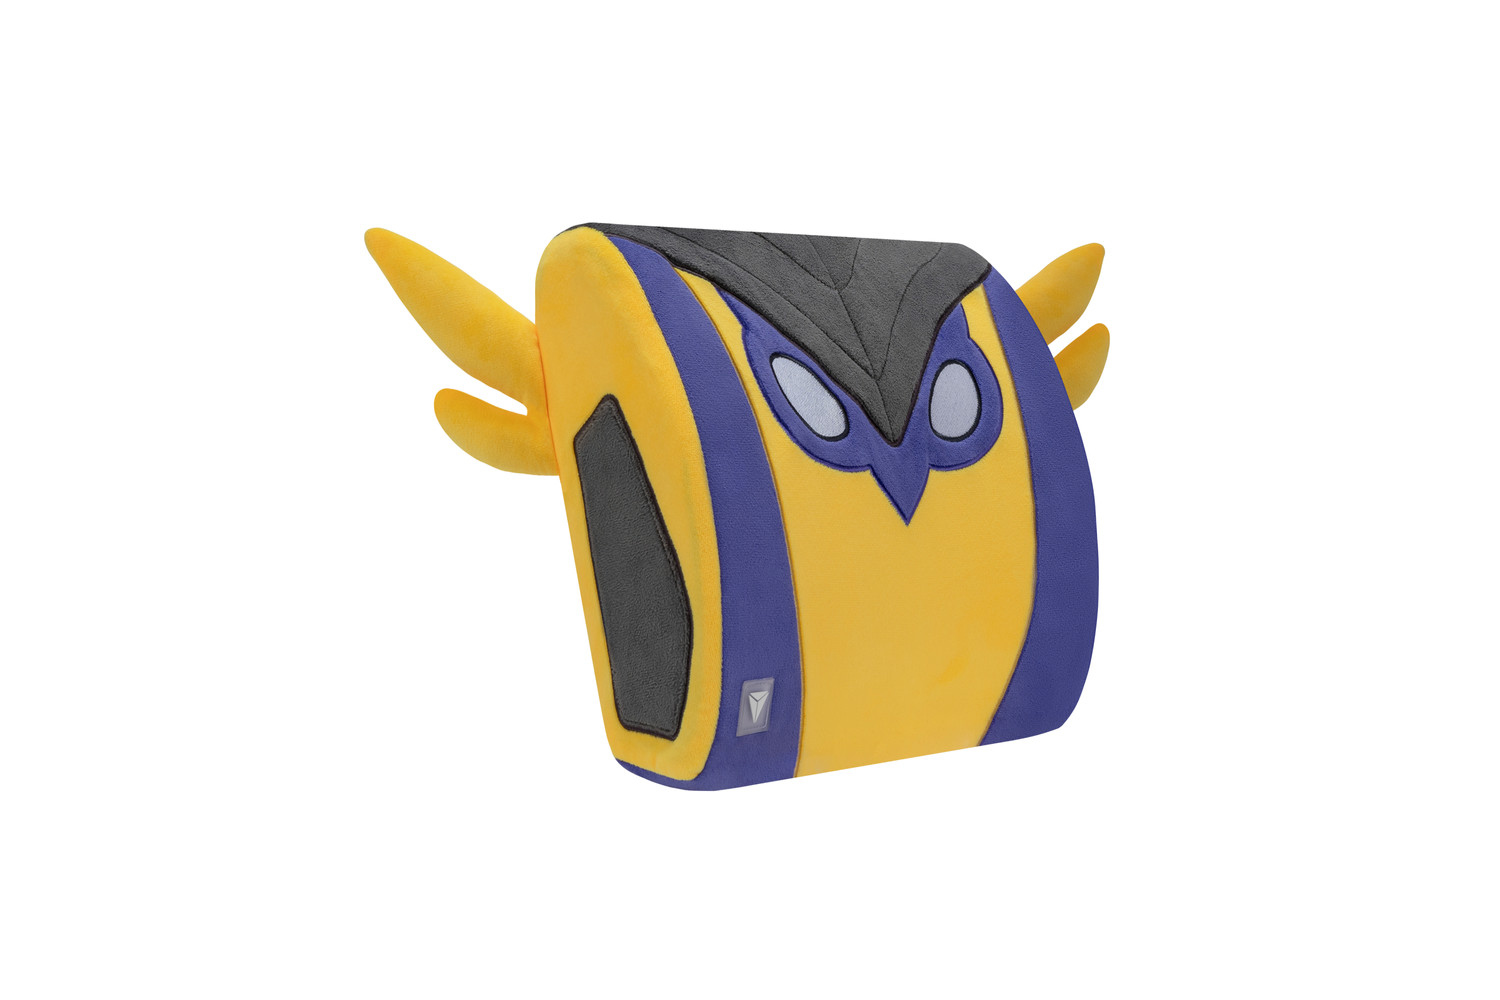 Secretlab - Our brand new velour memory foam lumbar pillows are larger, and  now made of memory foam. They are also more contoured and, shaped to  perfectly support the arch of your